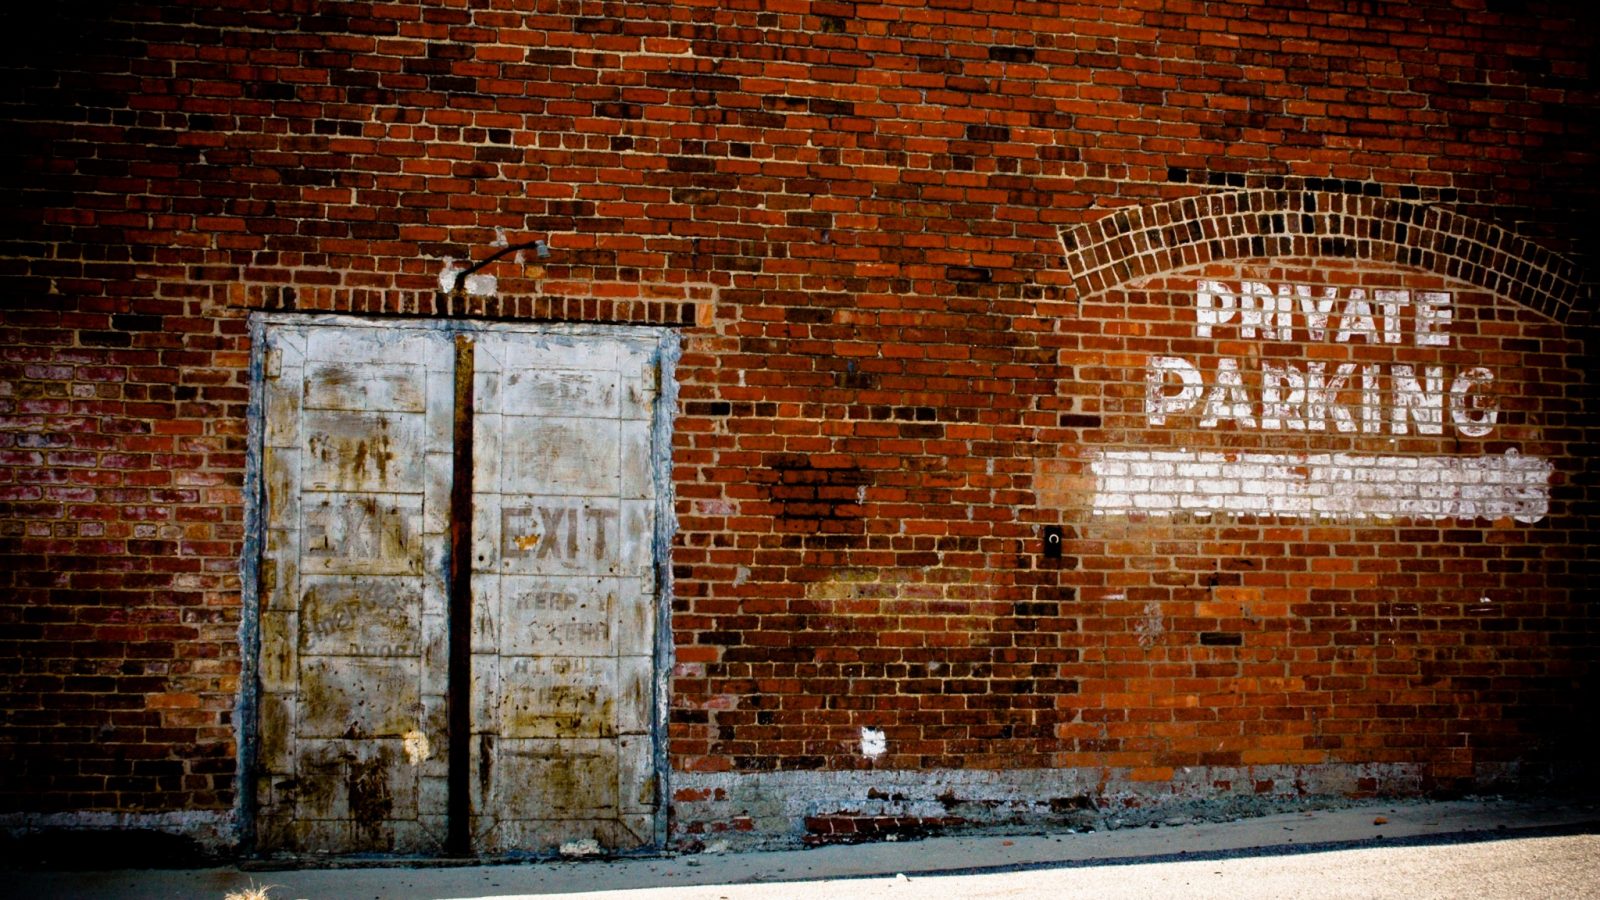 public-domain-images-free-stock-photos-brick-wall-rustic-old-metal-doors-private-parking